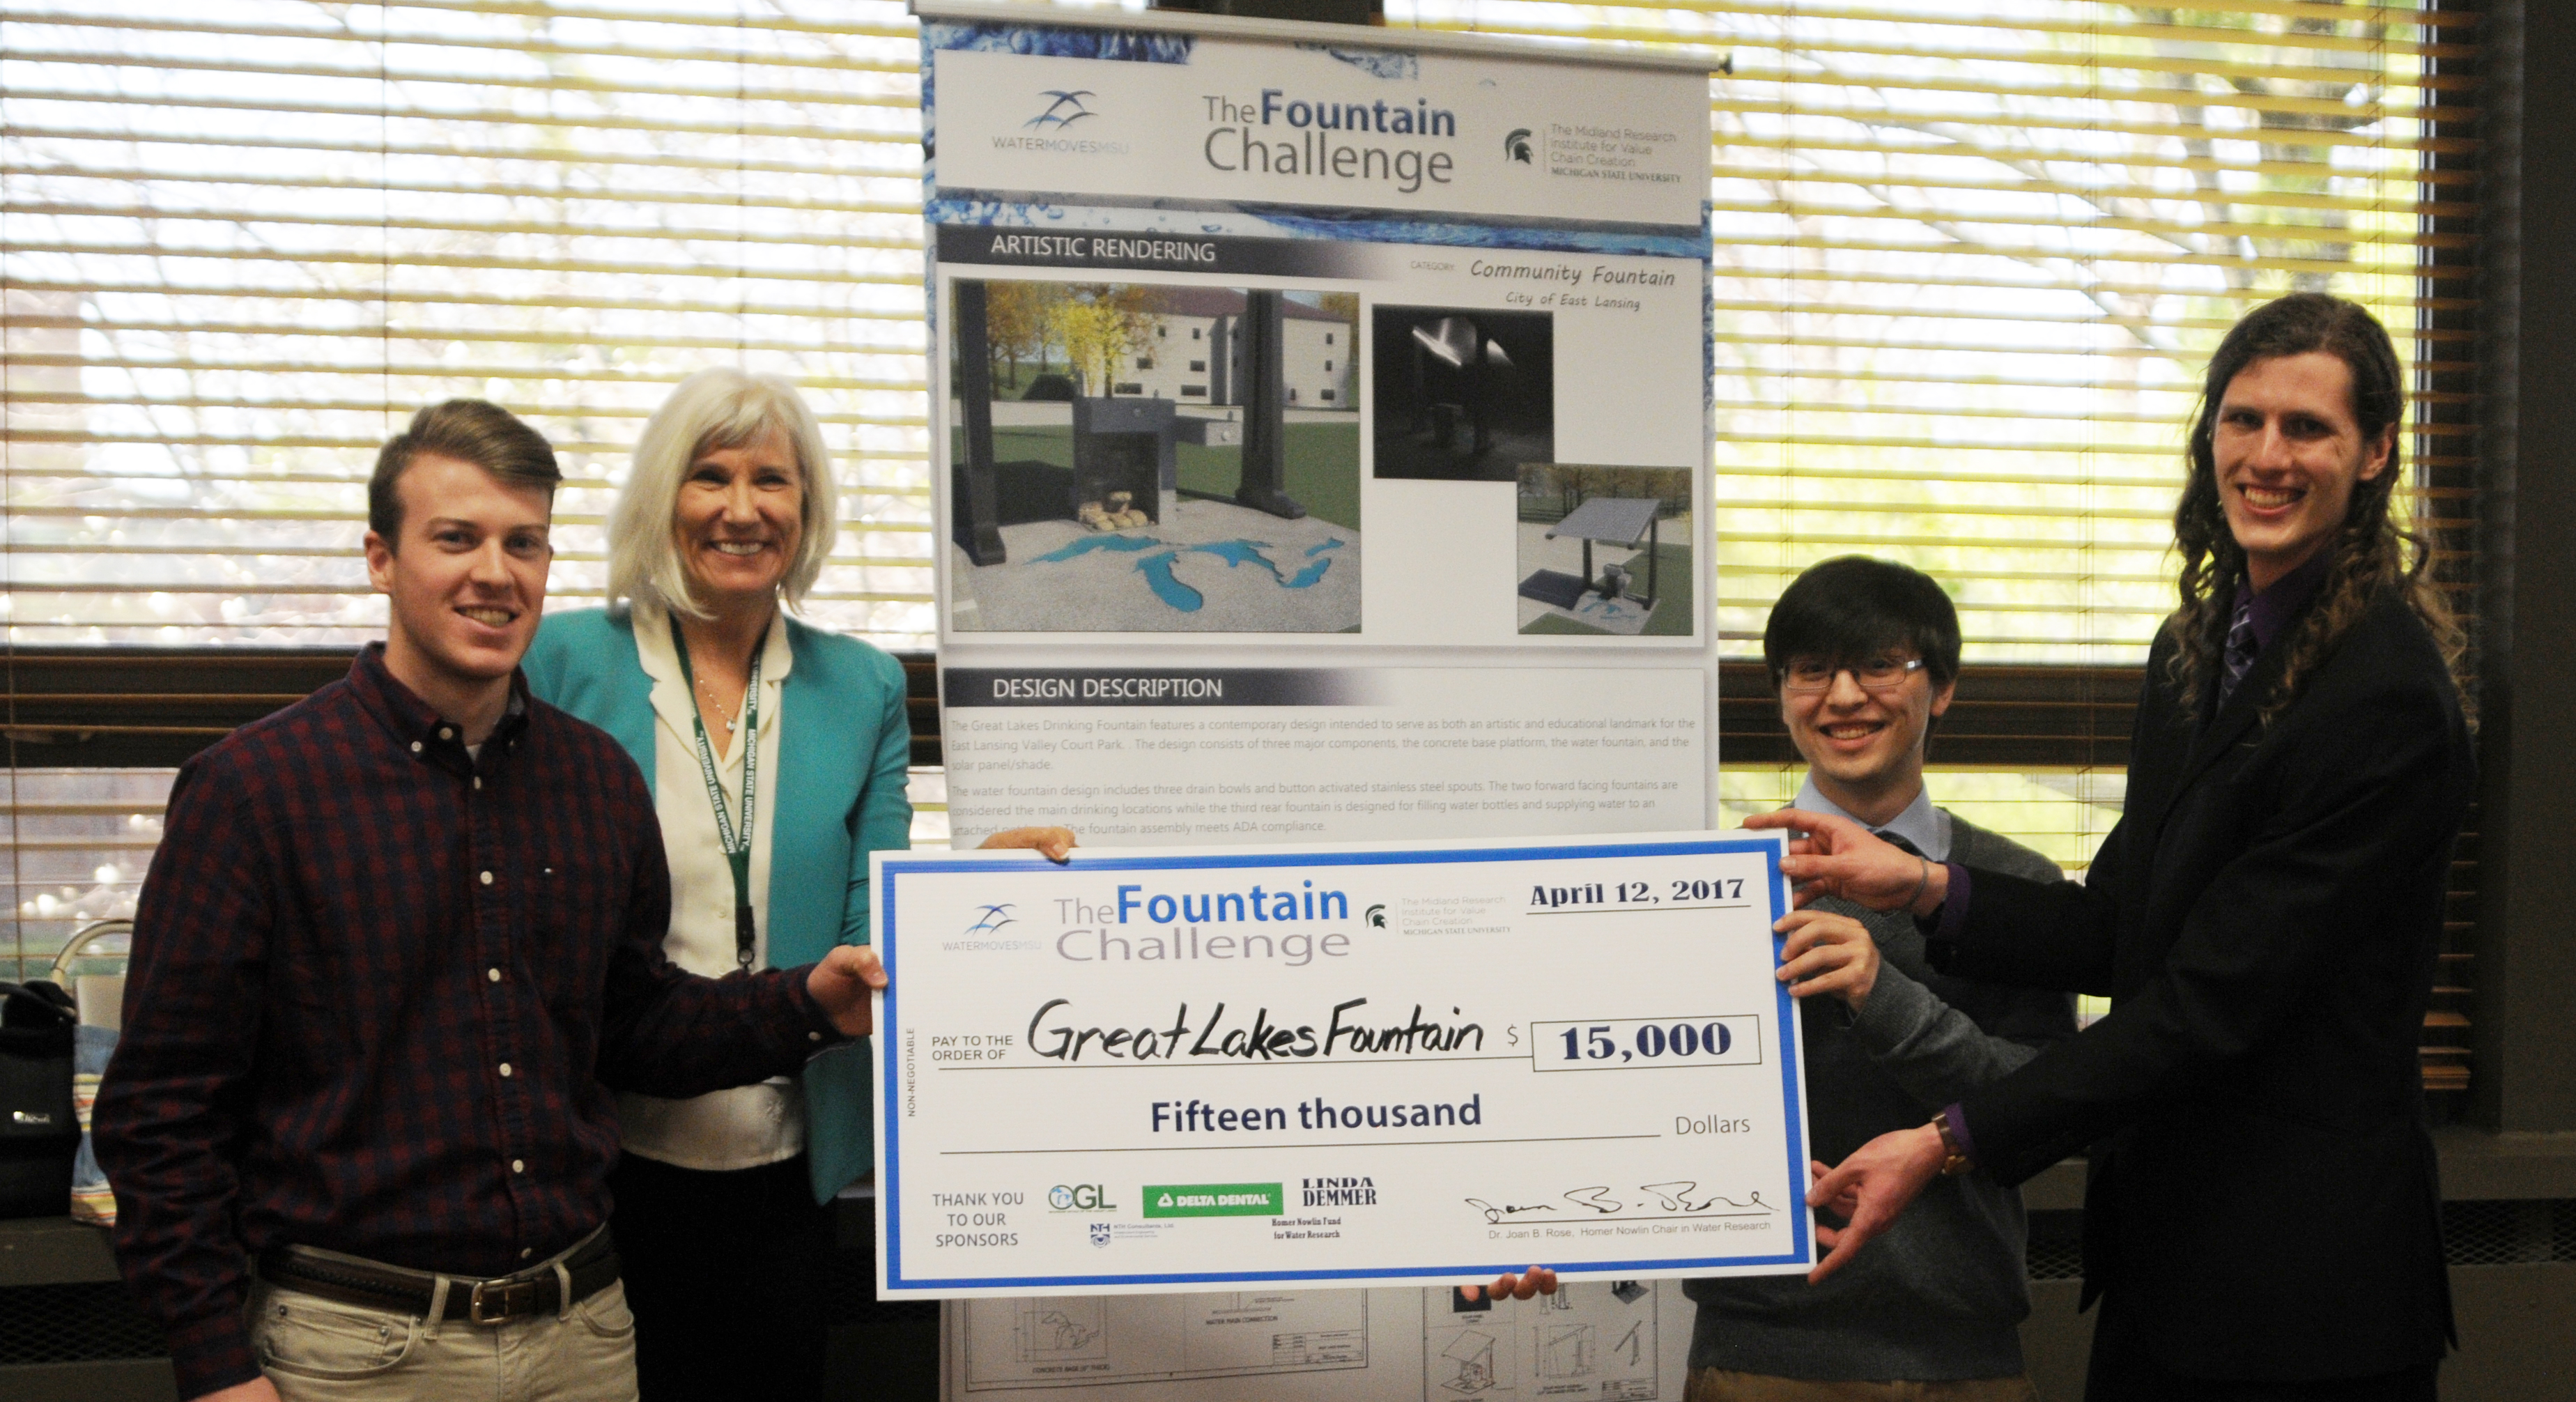 A photo of the winners of the Fountain Challenging holding their prize check for $15,000.